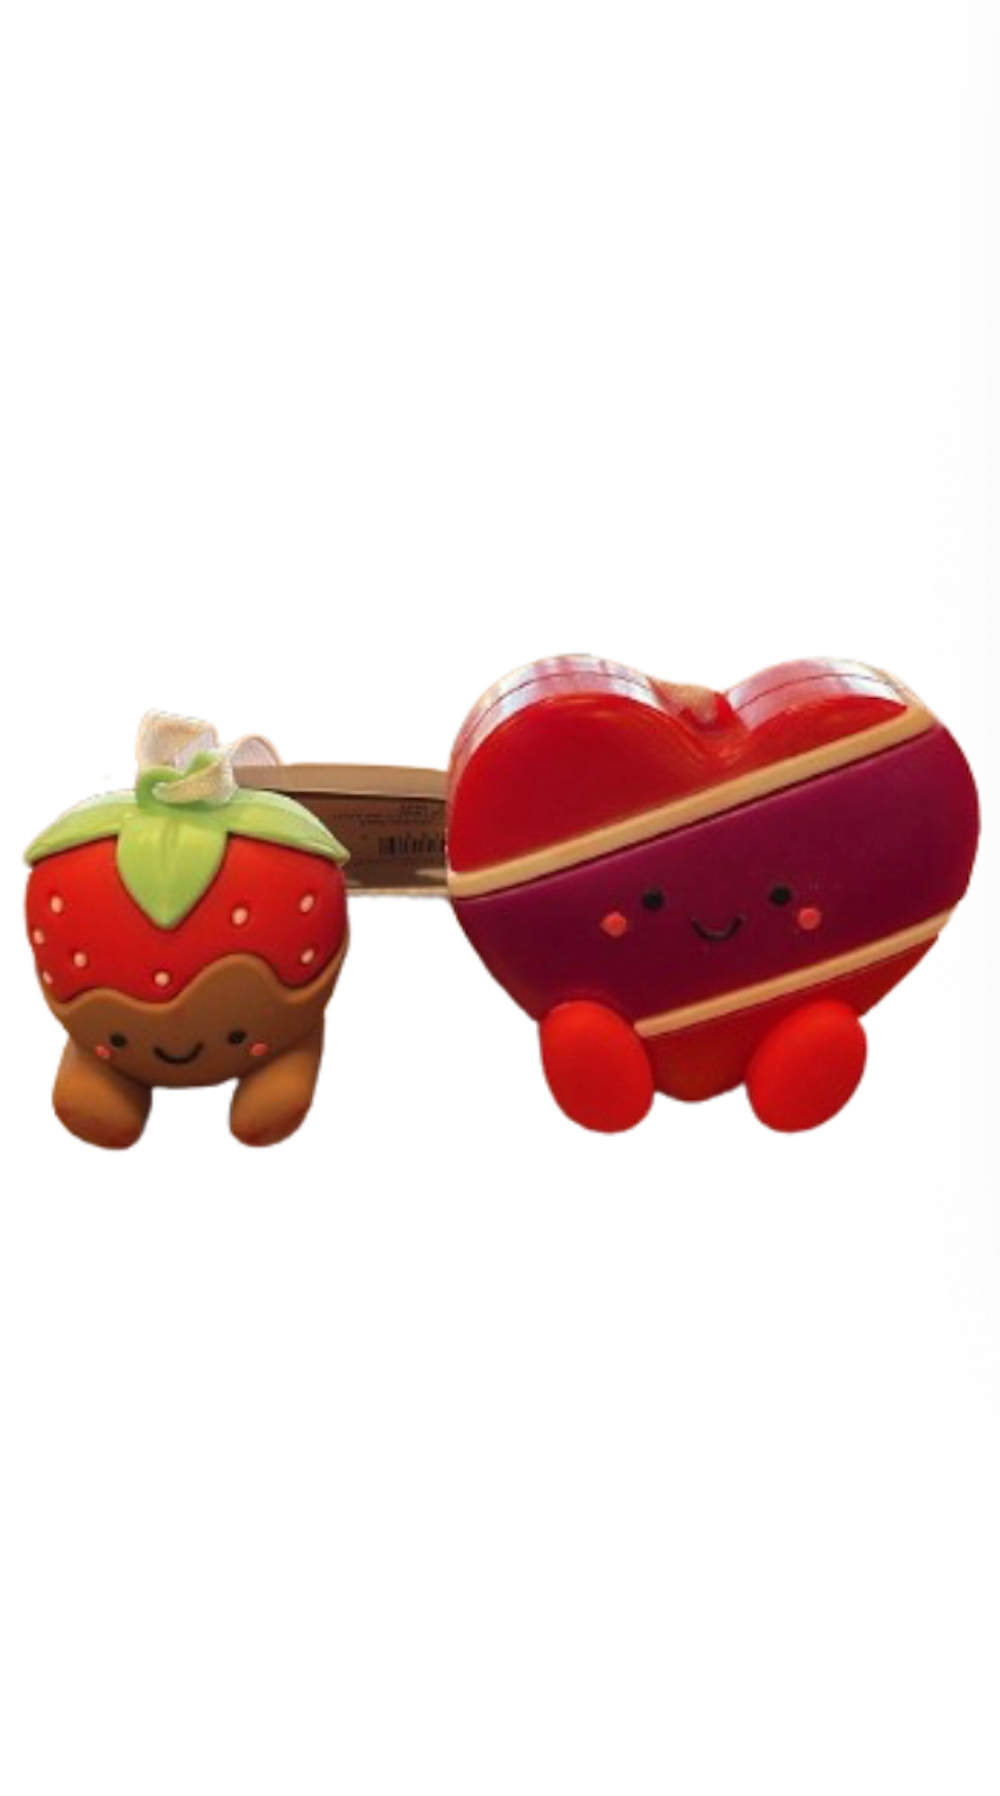 Hallmark Strawberry and Chocolate Magnetic Christmas Ornaments New with Tag